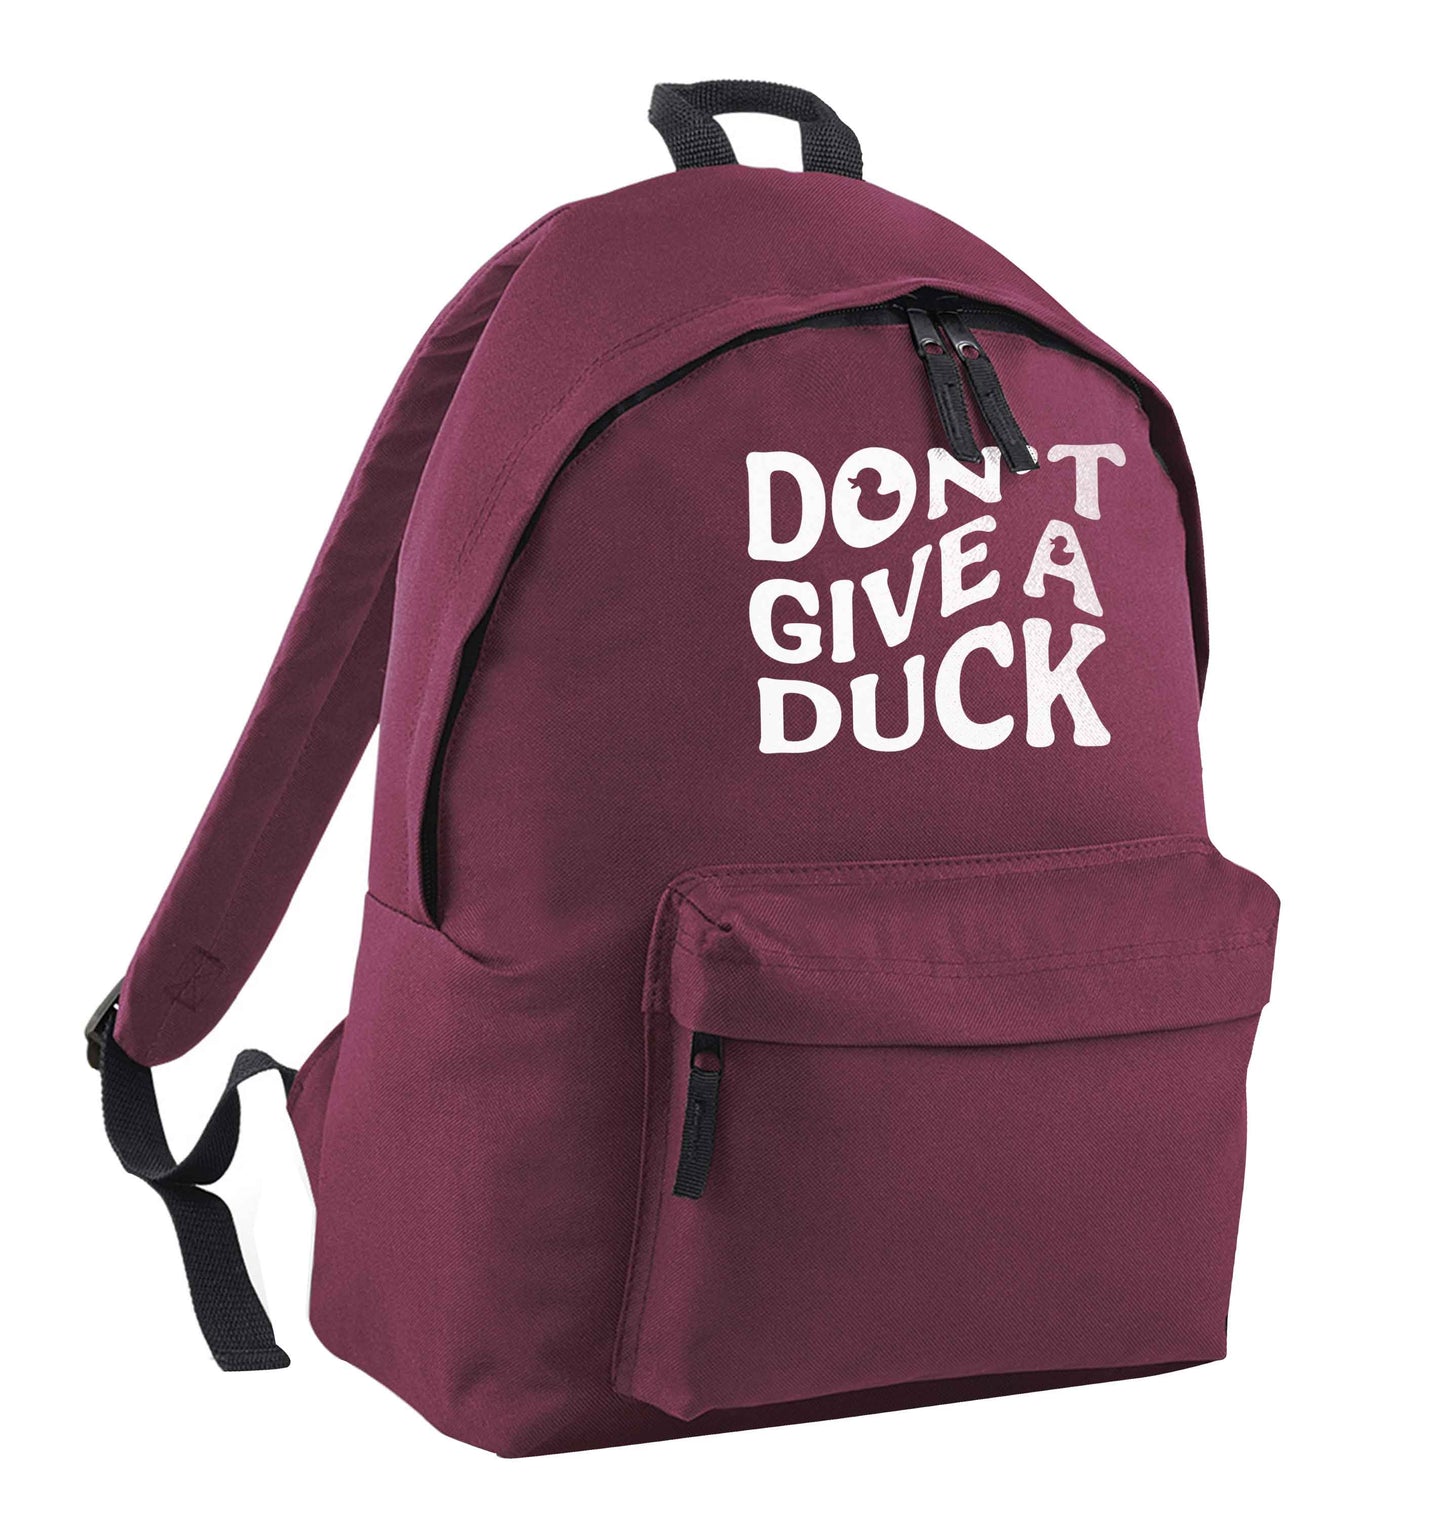 Don't give a duck maroon children's backpack